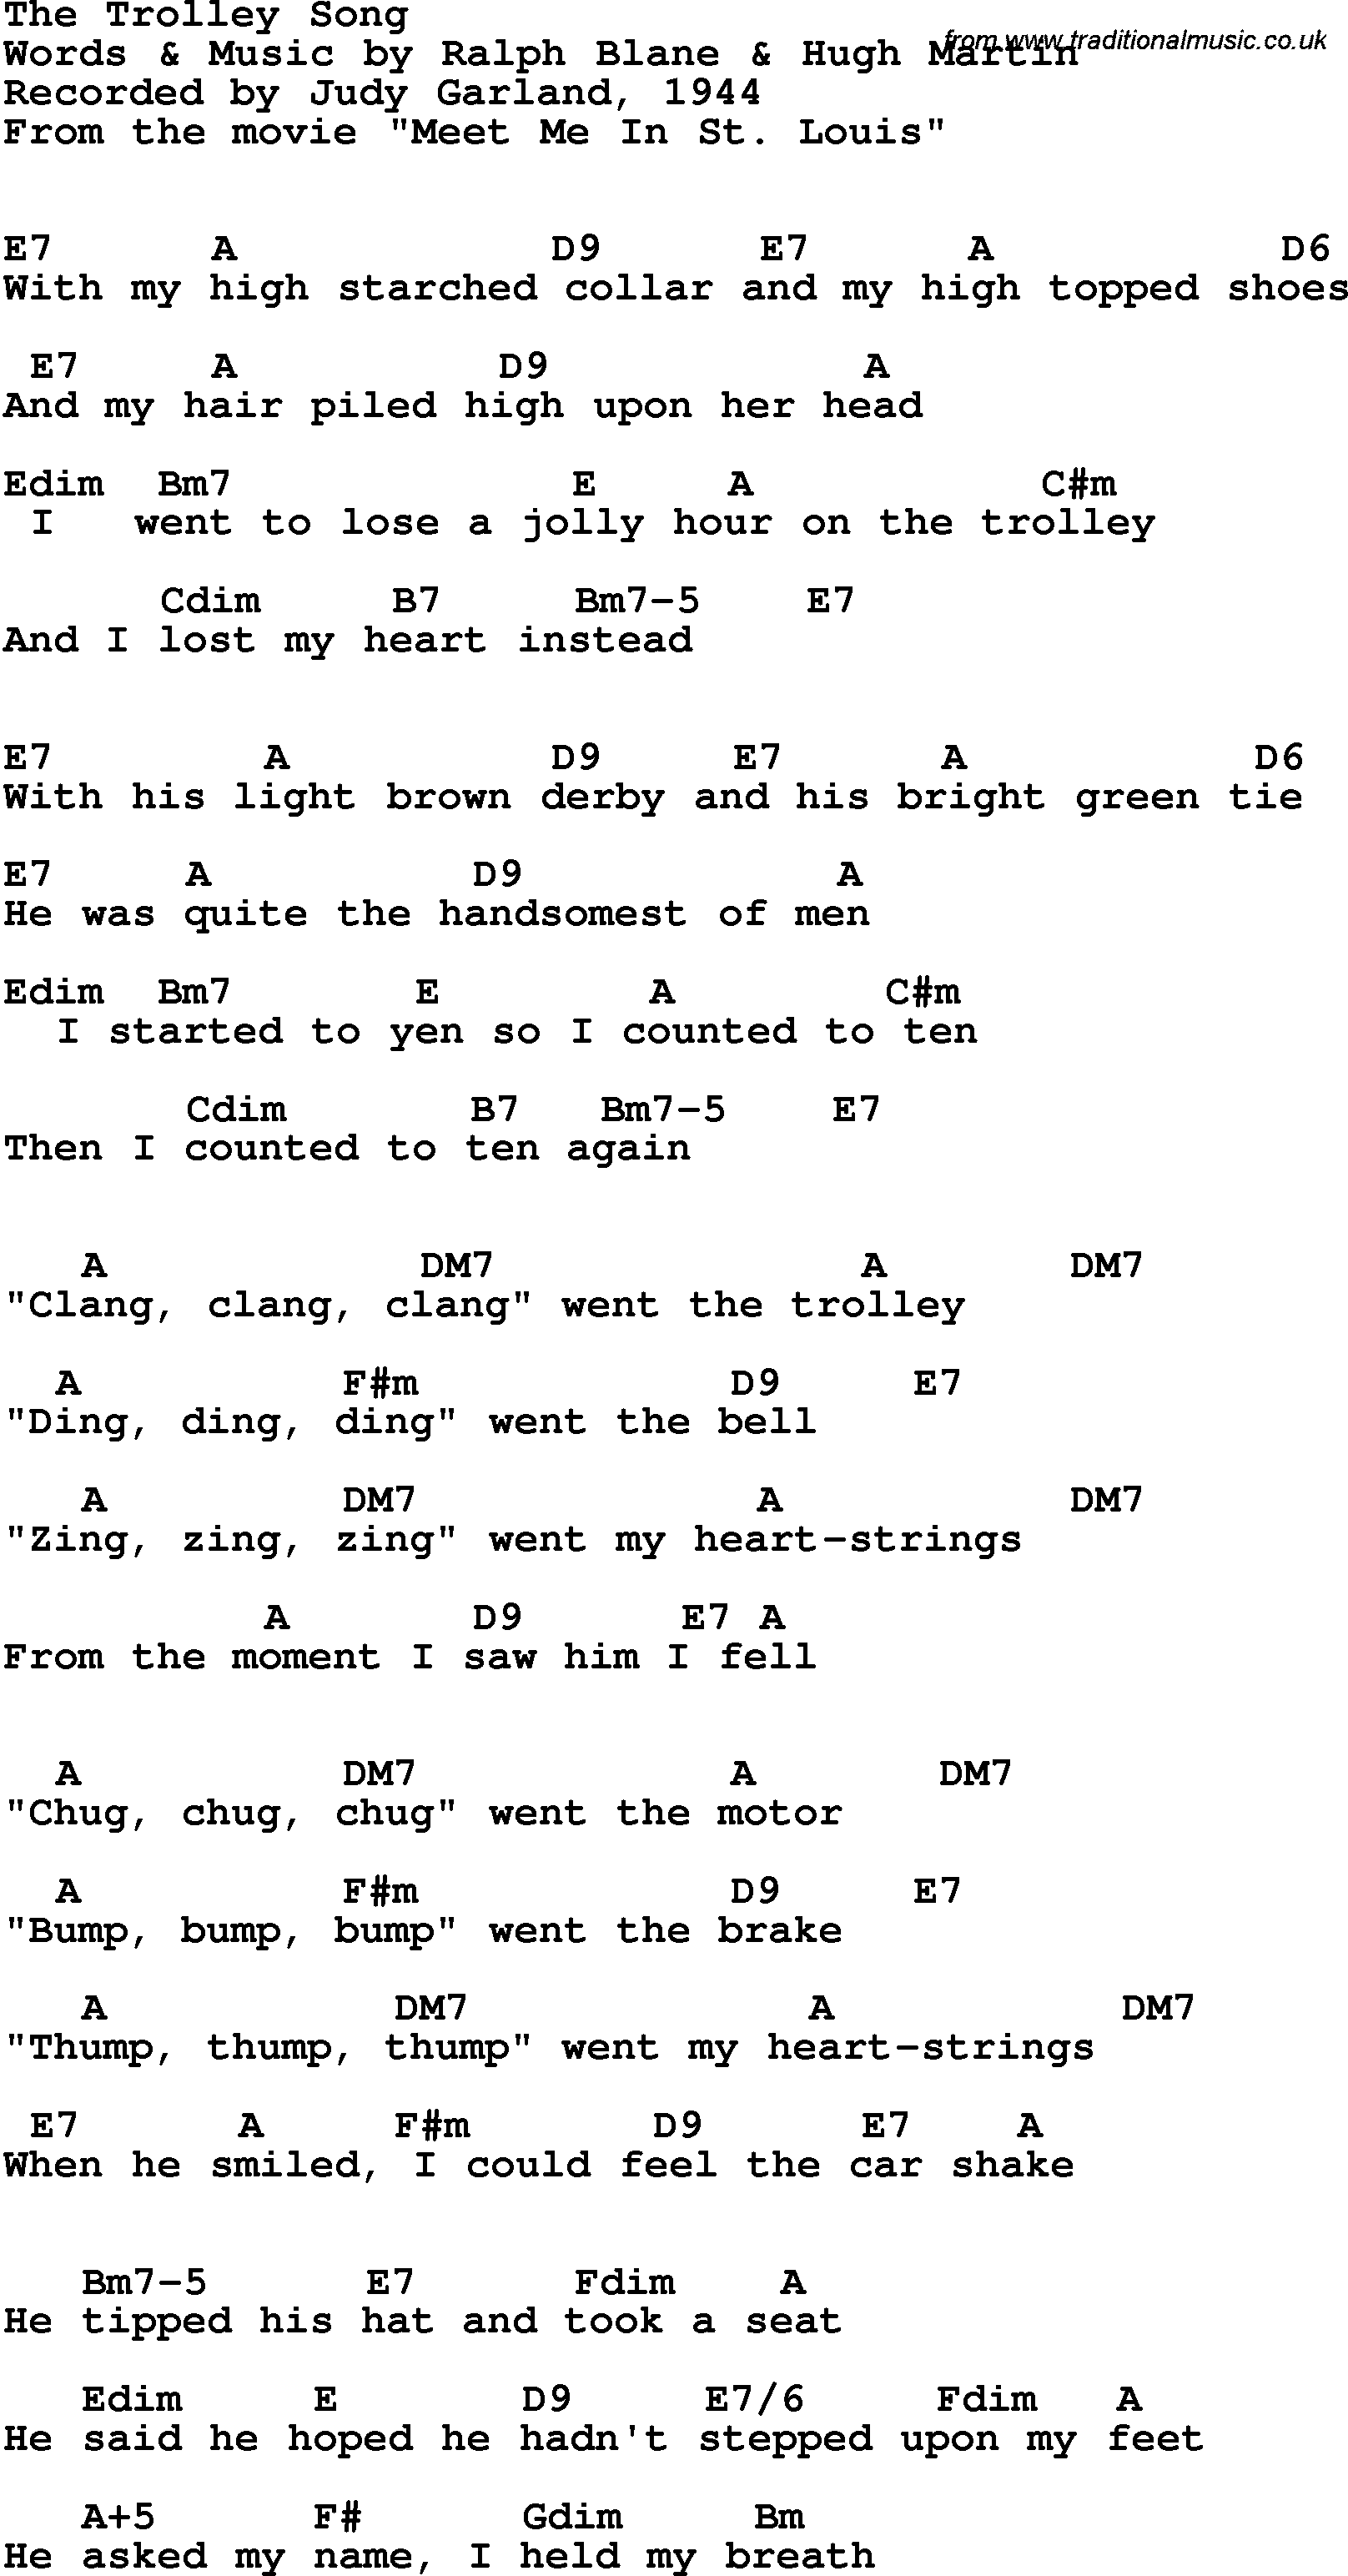 Song Lyrics with guitar chords for Trolley Song, The - Judy Garland, 1944